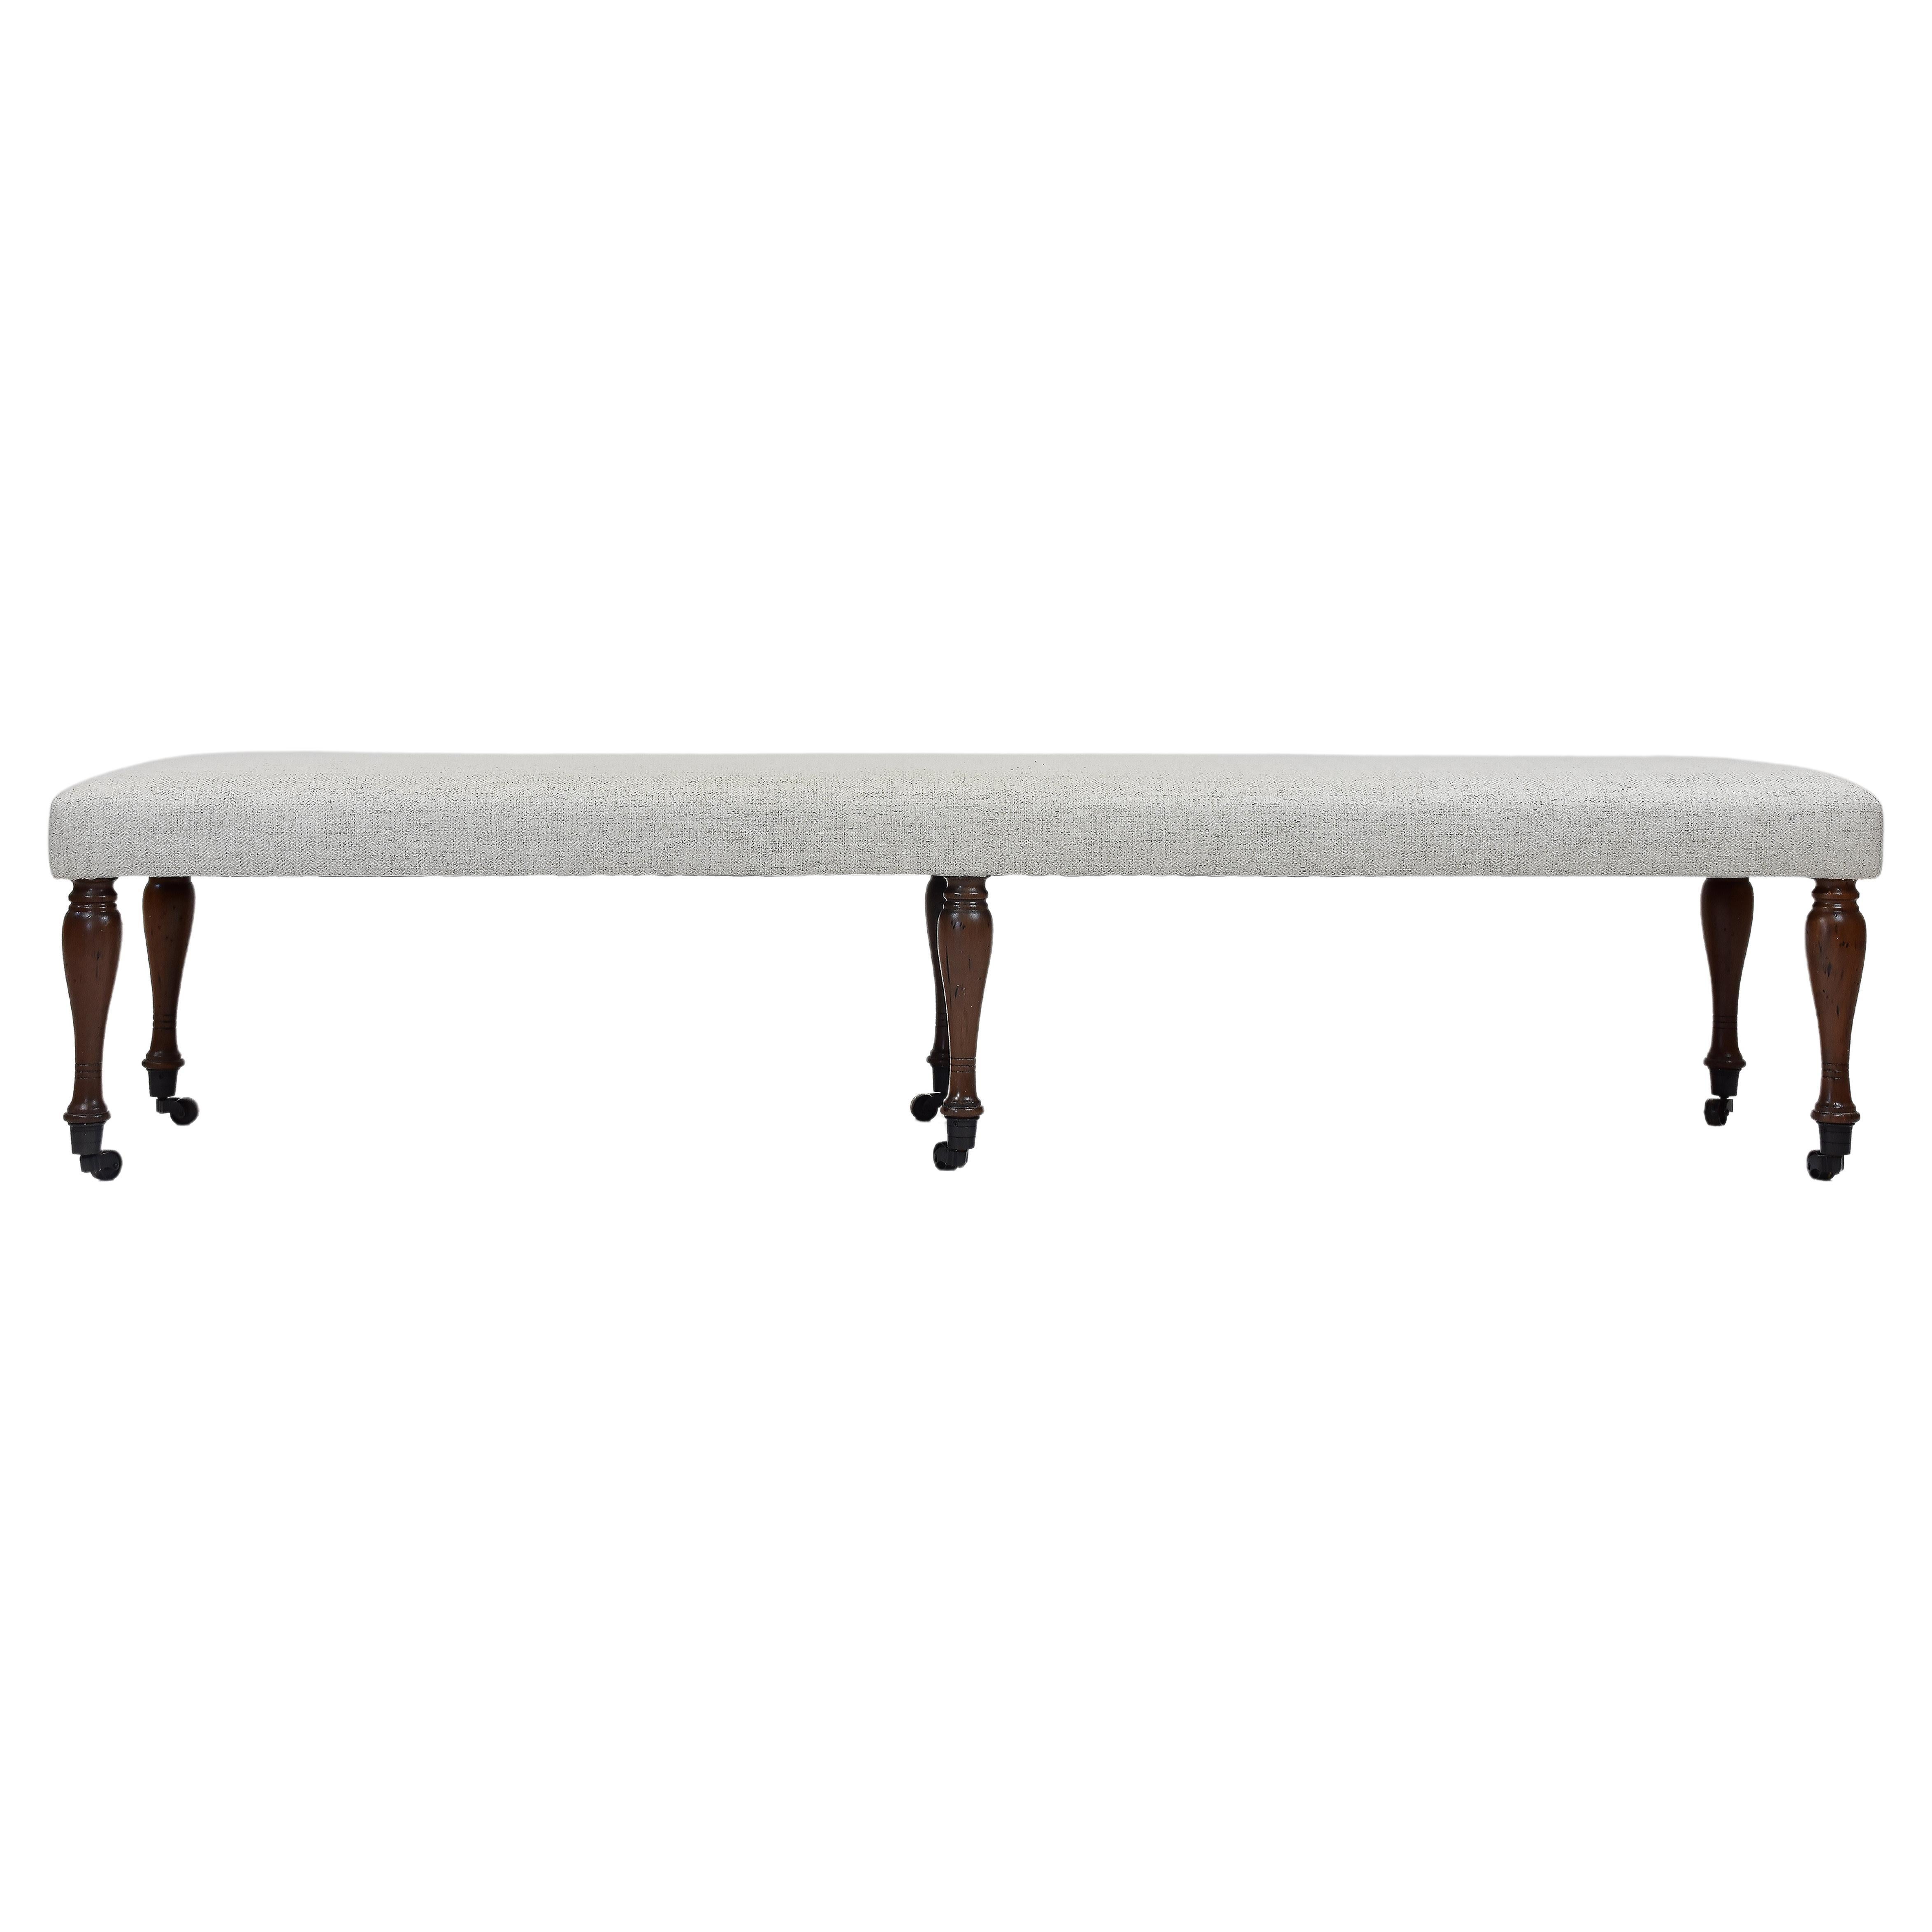 Le Jeune Upholstery Antoinette Long Bench Floor Model with Casters